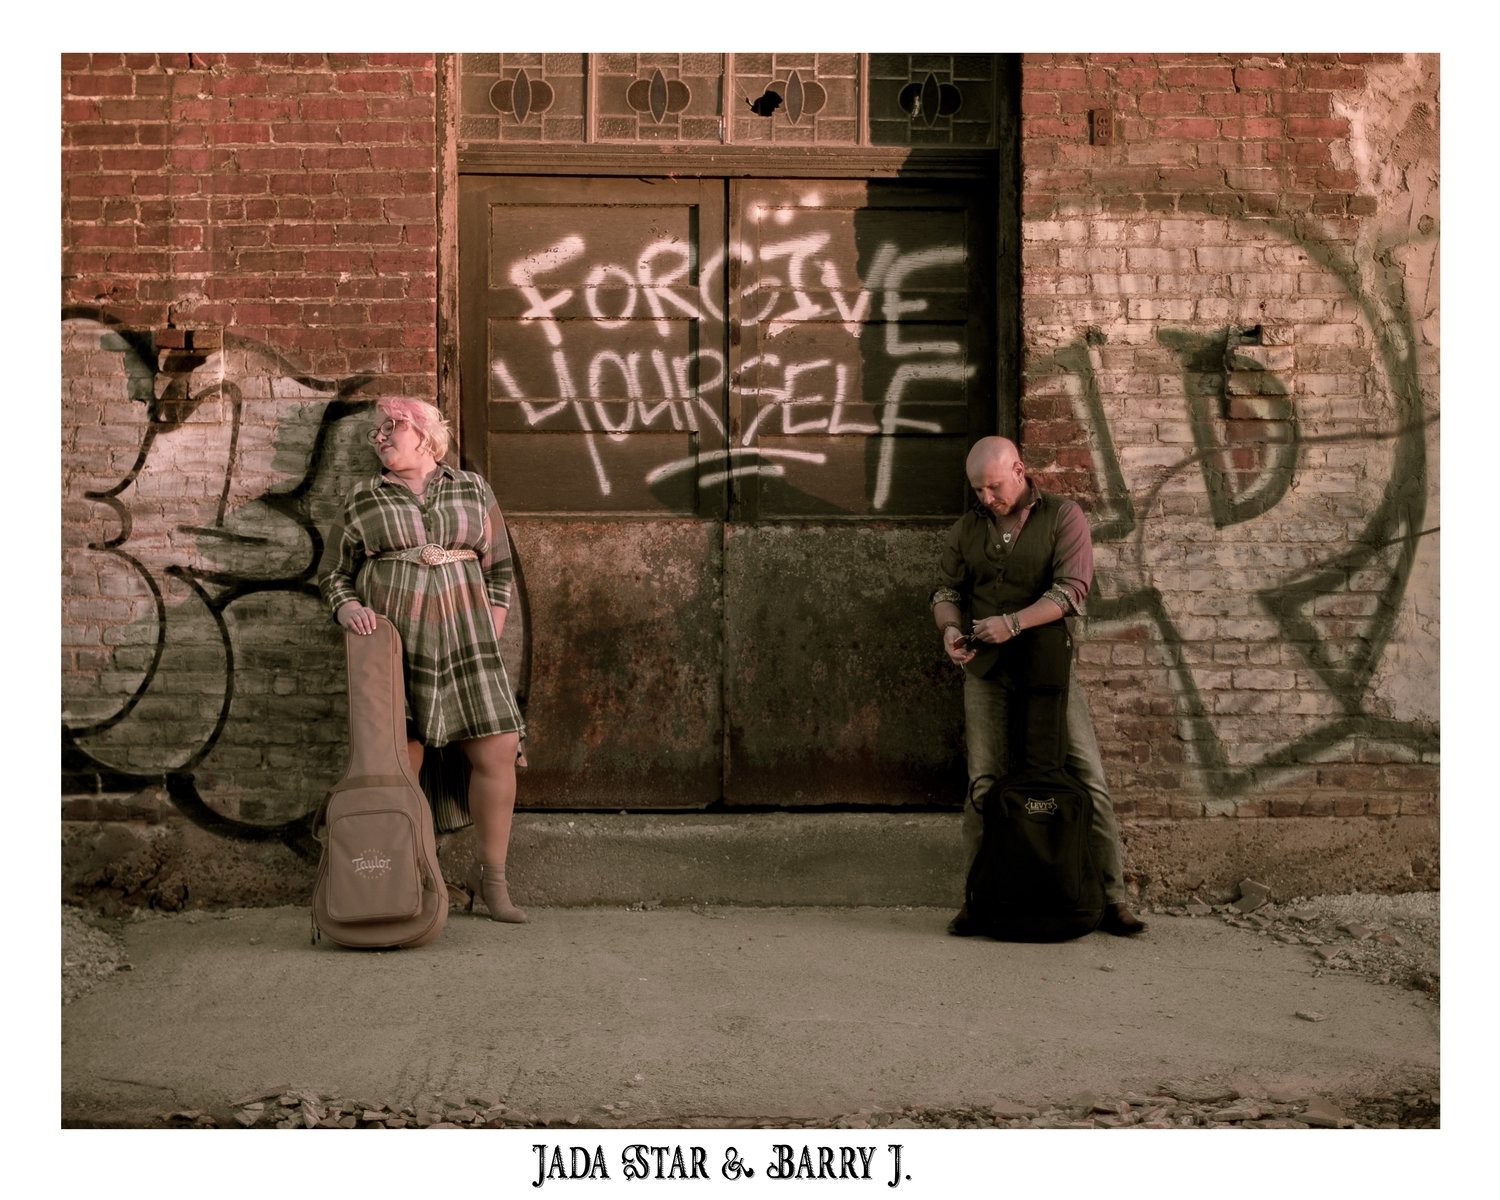 8x10 photo 'Forgive Yourself' signed by Jada & Barry